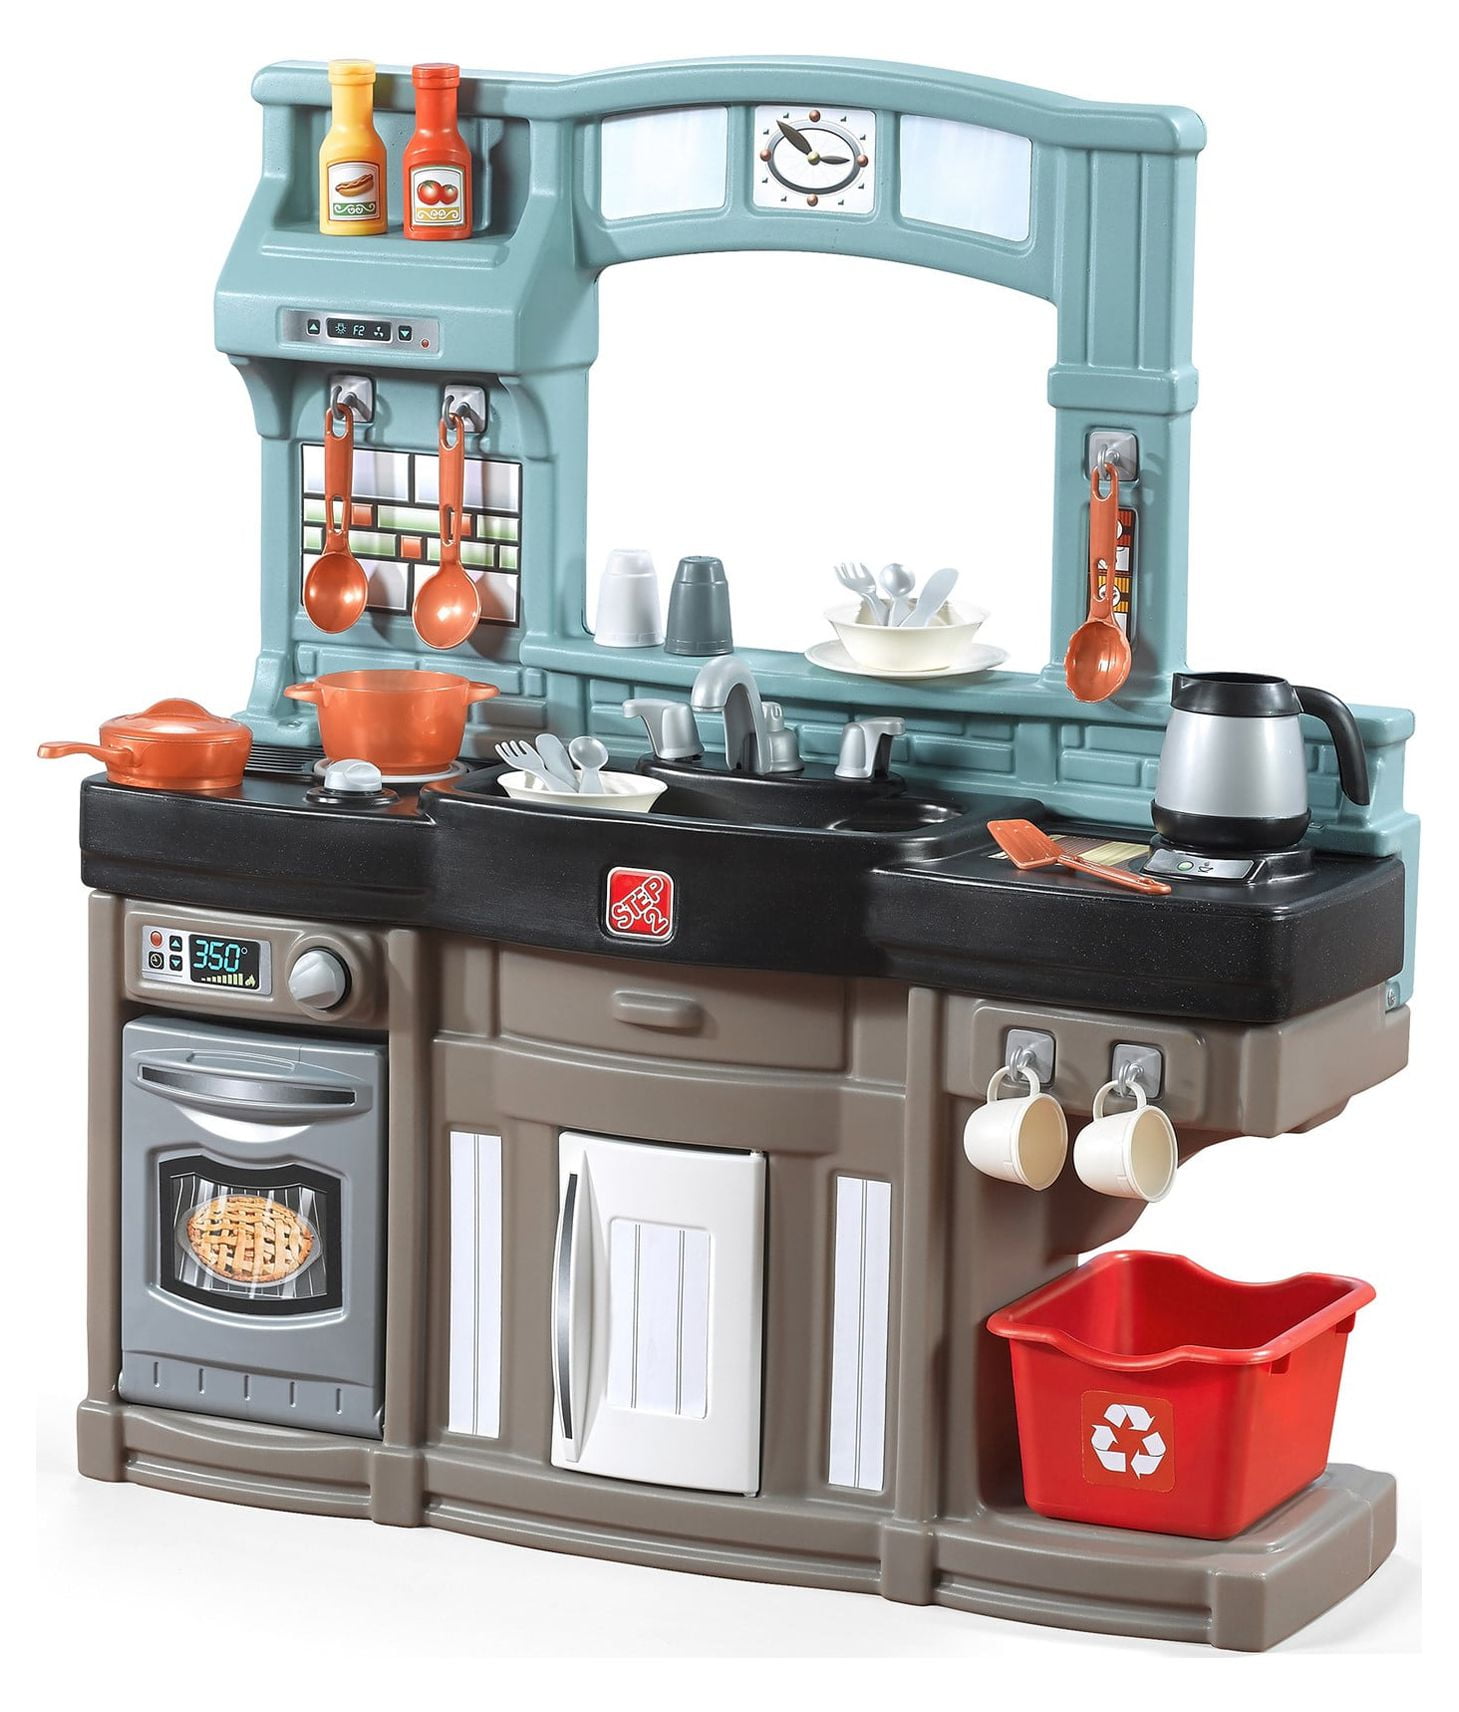 Step2 Best Chef S Plastic Toddler Toy Kitchen Playset Includes 25 Piece Kitchen Play Set F9671fa7 016a 4f7c A8e9 2db58227e139.d66fbf4da224aa99d468e17e7d29407a 